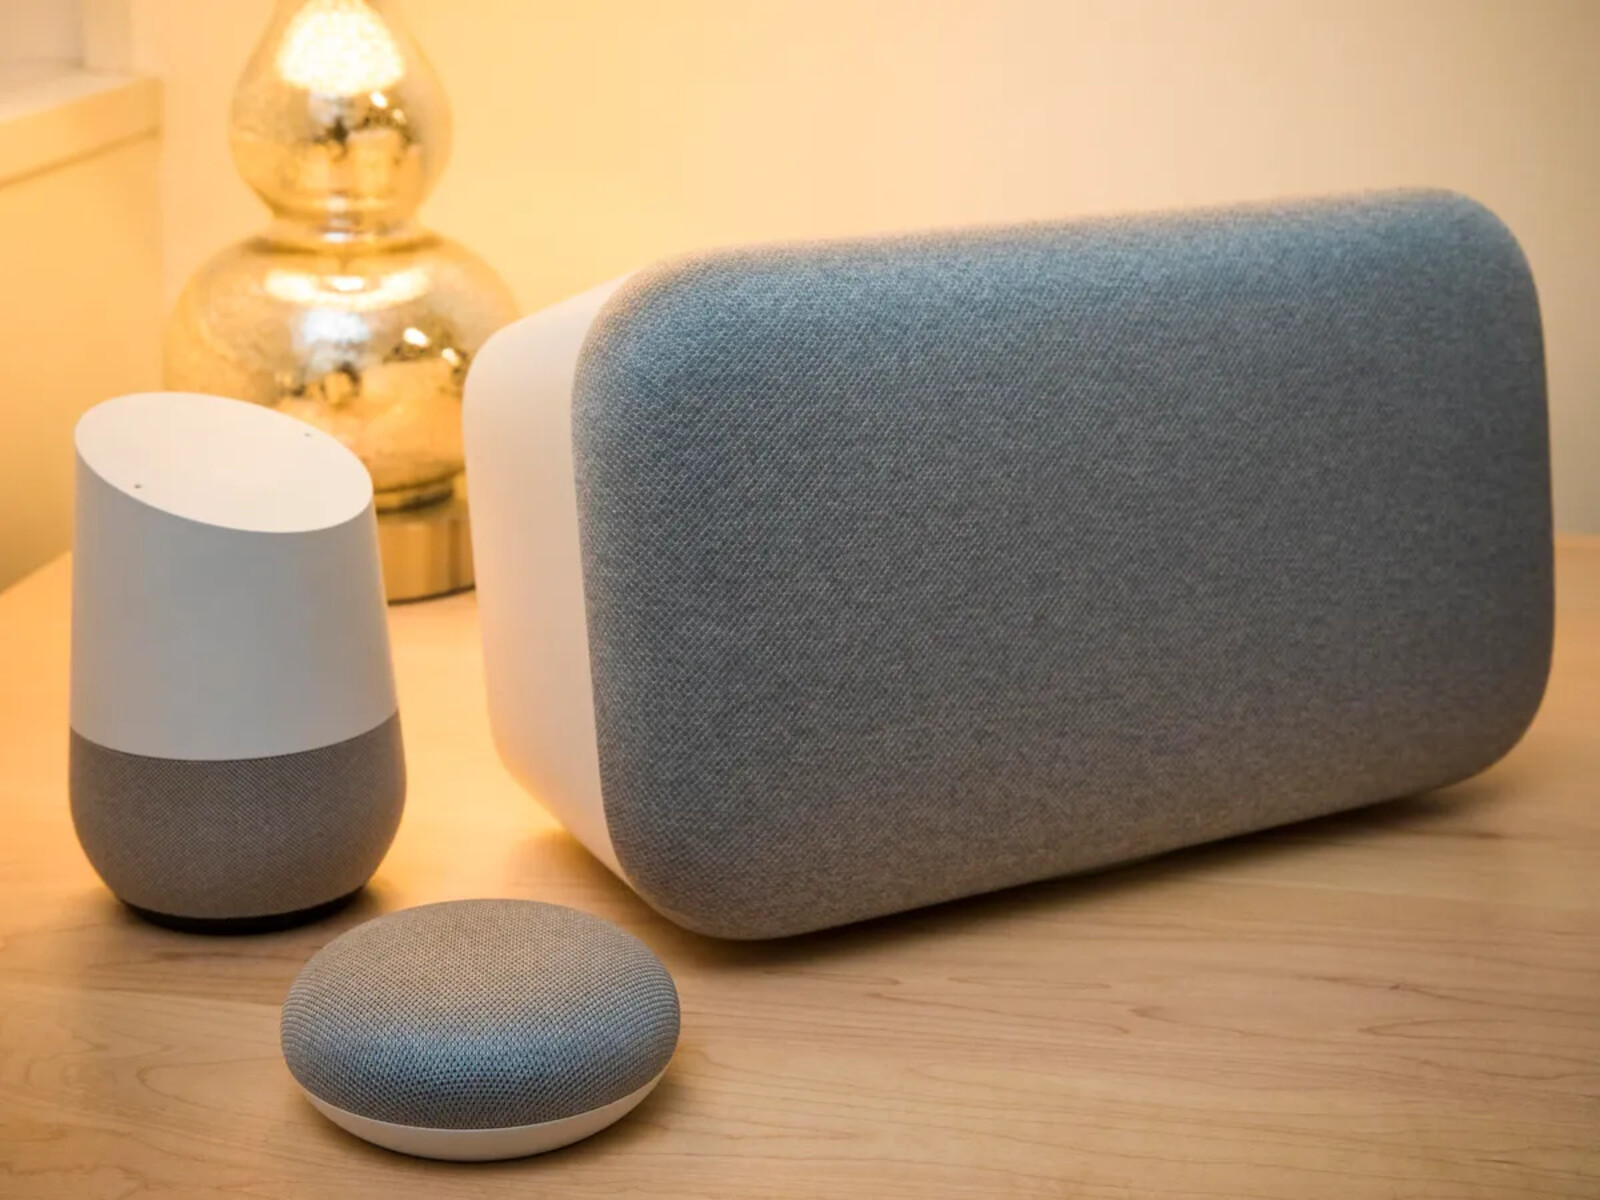 What Can A Google Assistant App Do Everything A Smart Speaker Can